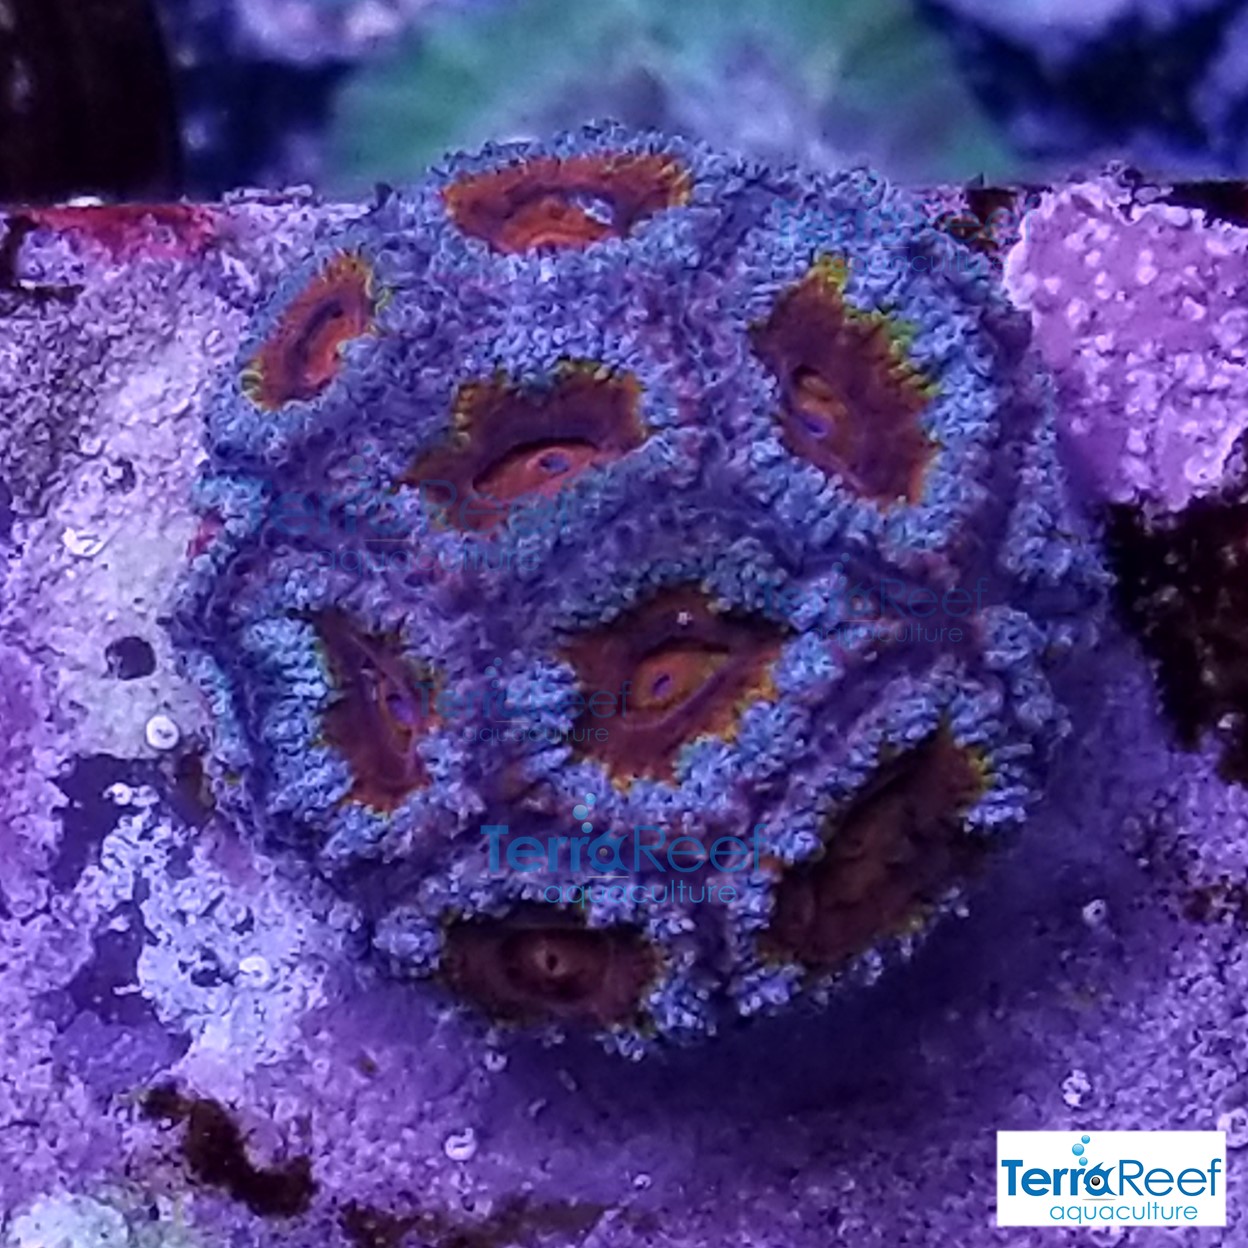 Red-Micromussa-Coral-Acan-WYSIWYG-Frag-5-20210113_005911.jpg